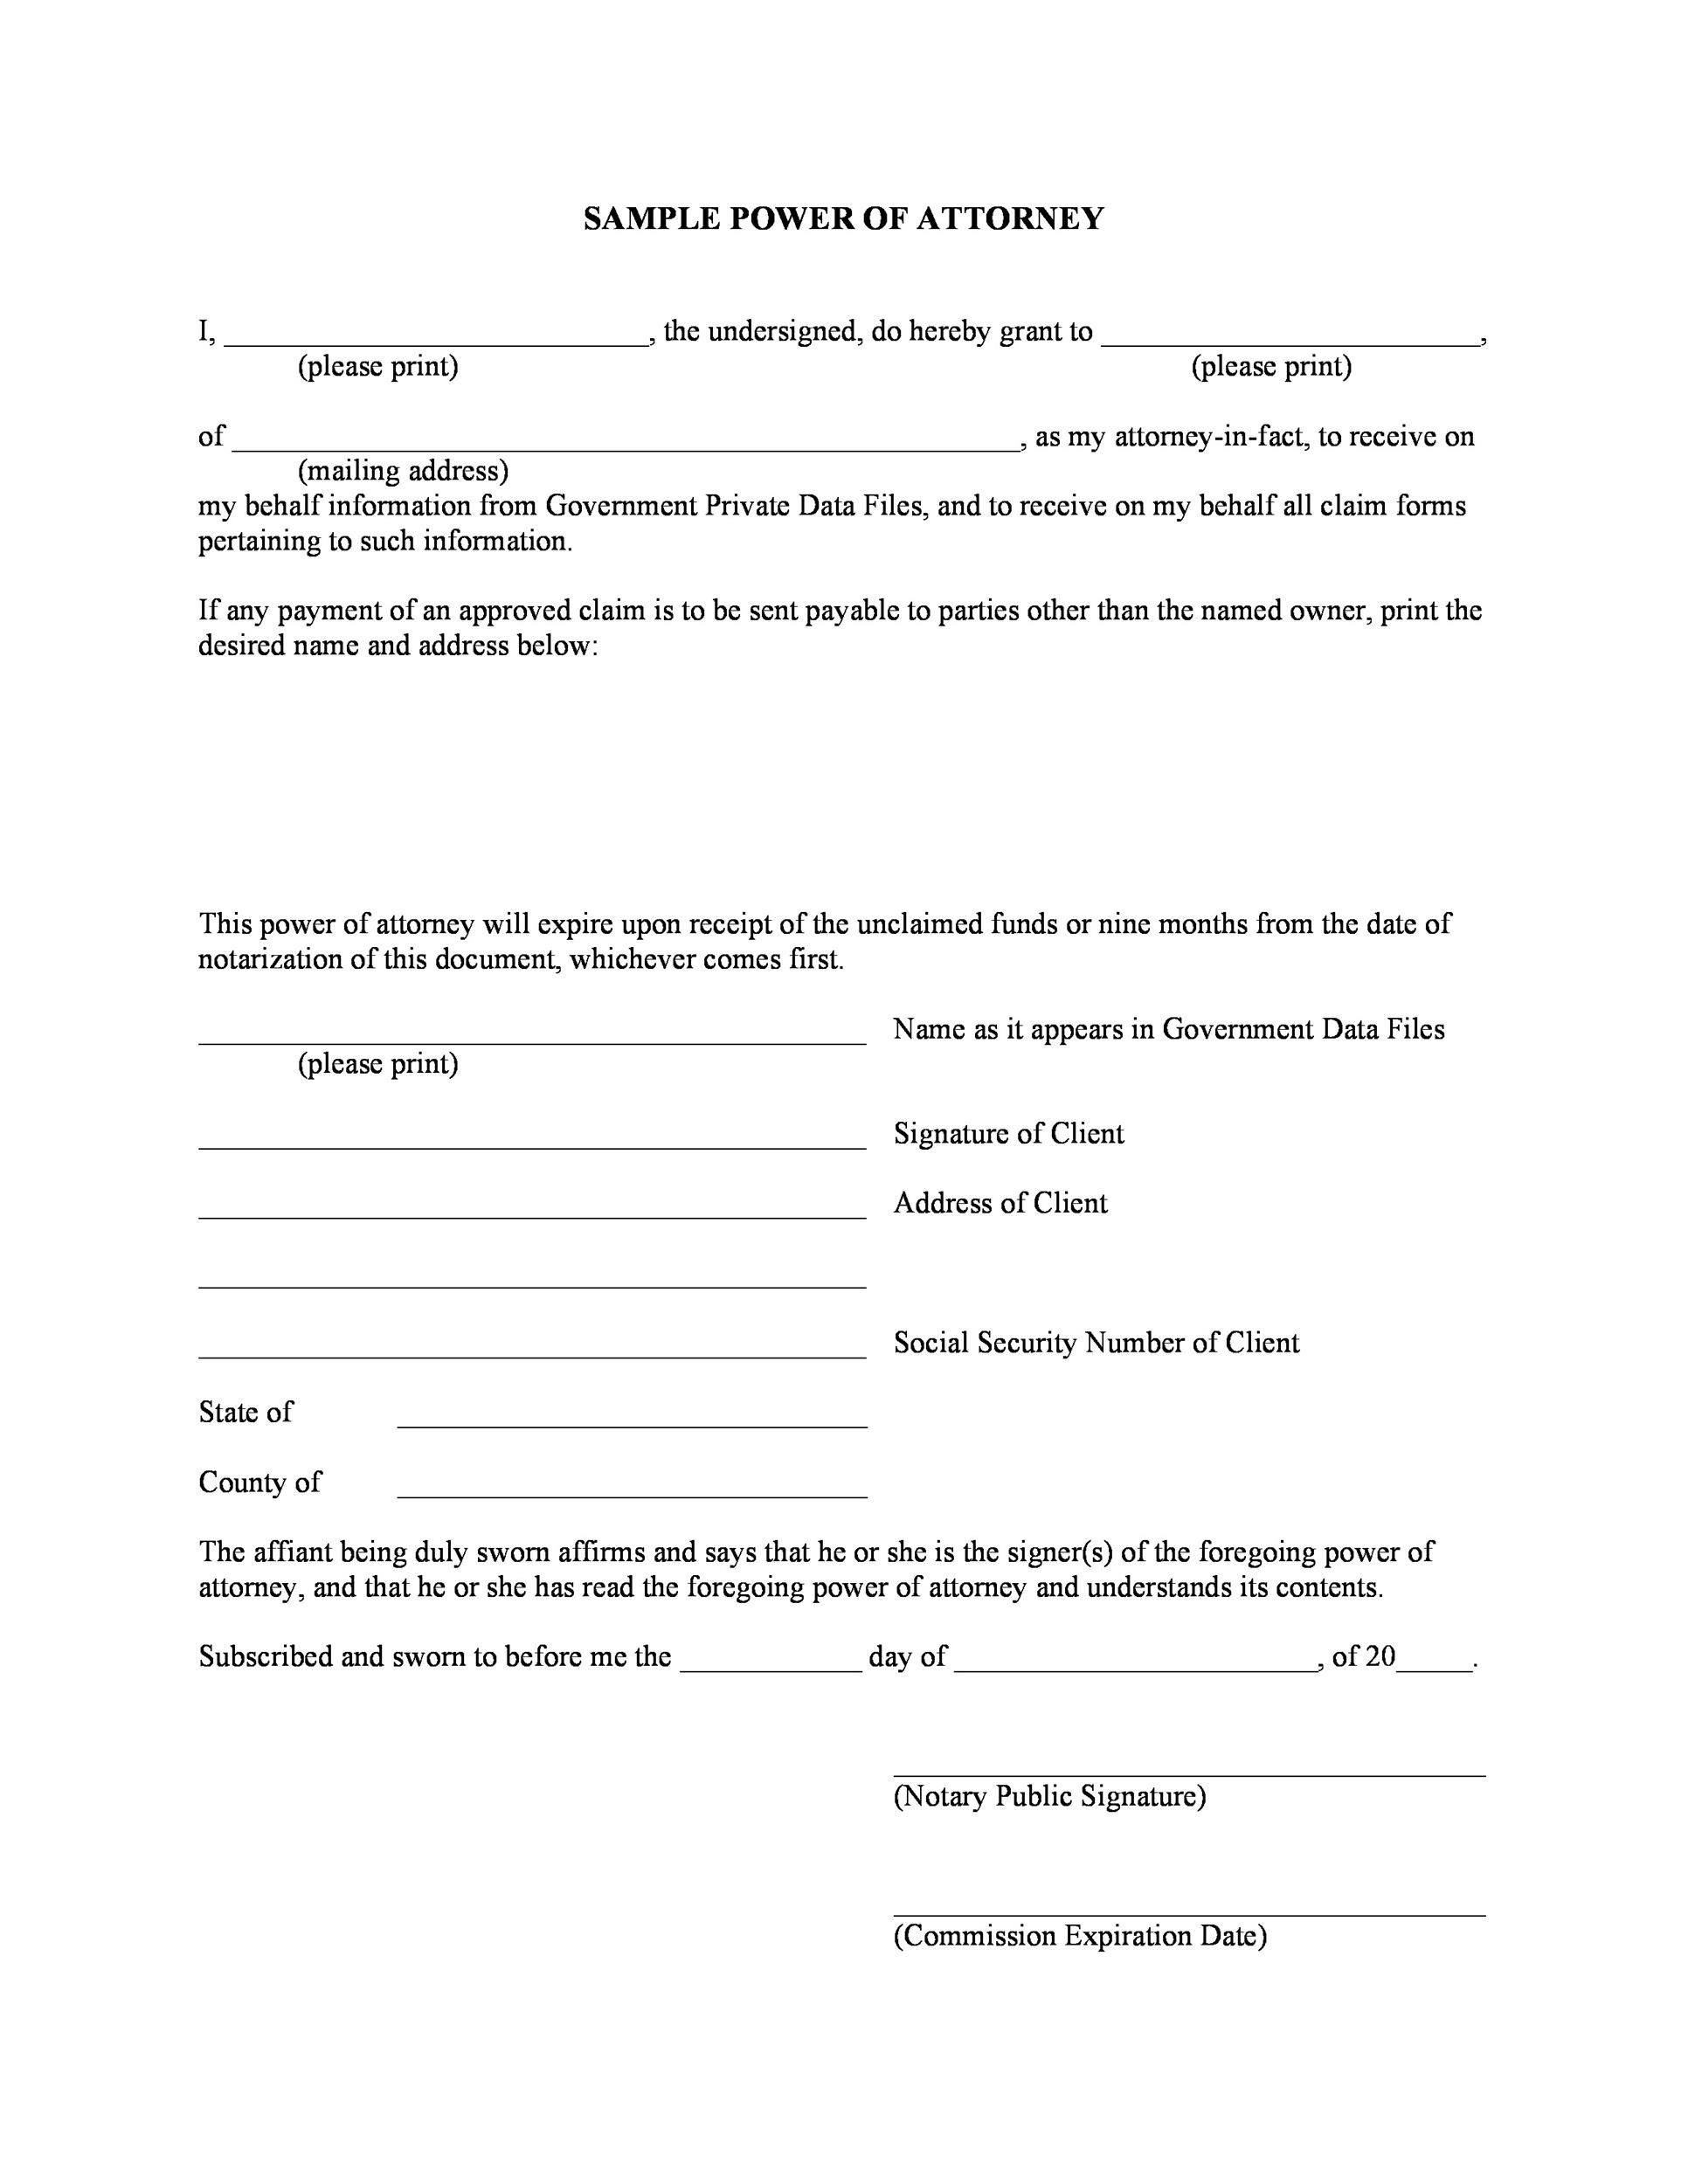 Power Of Attorney Form Template from templatelab.com